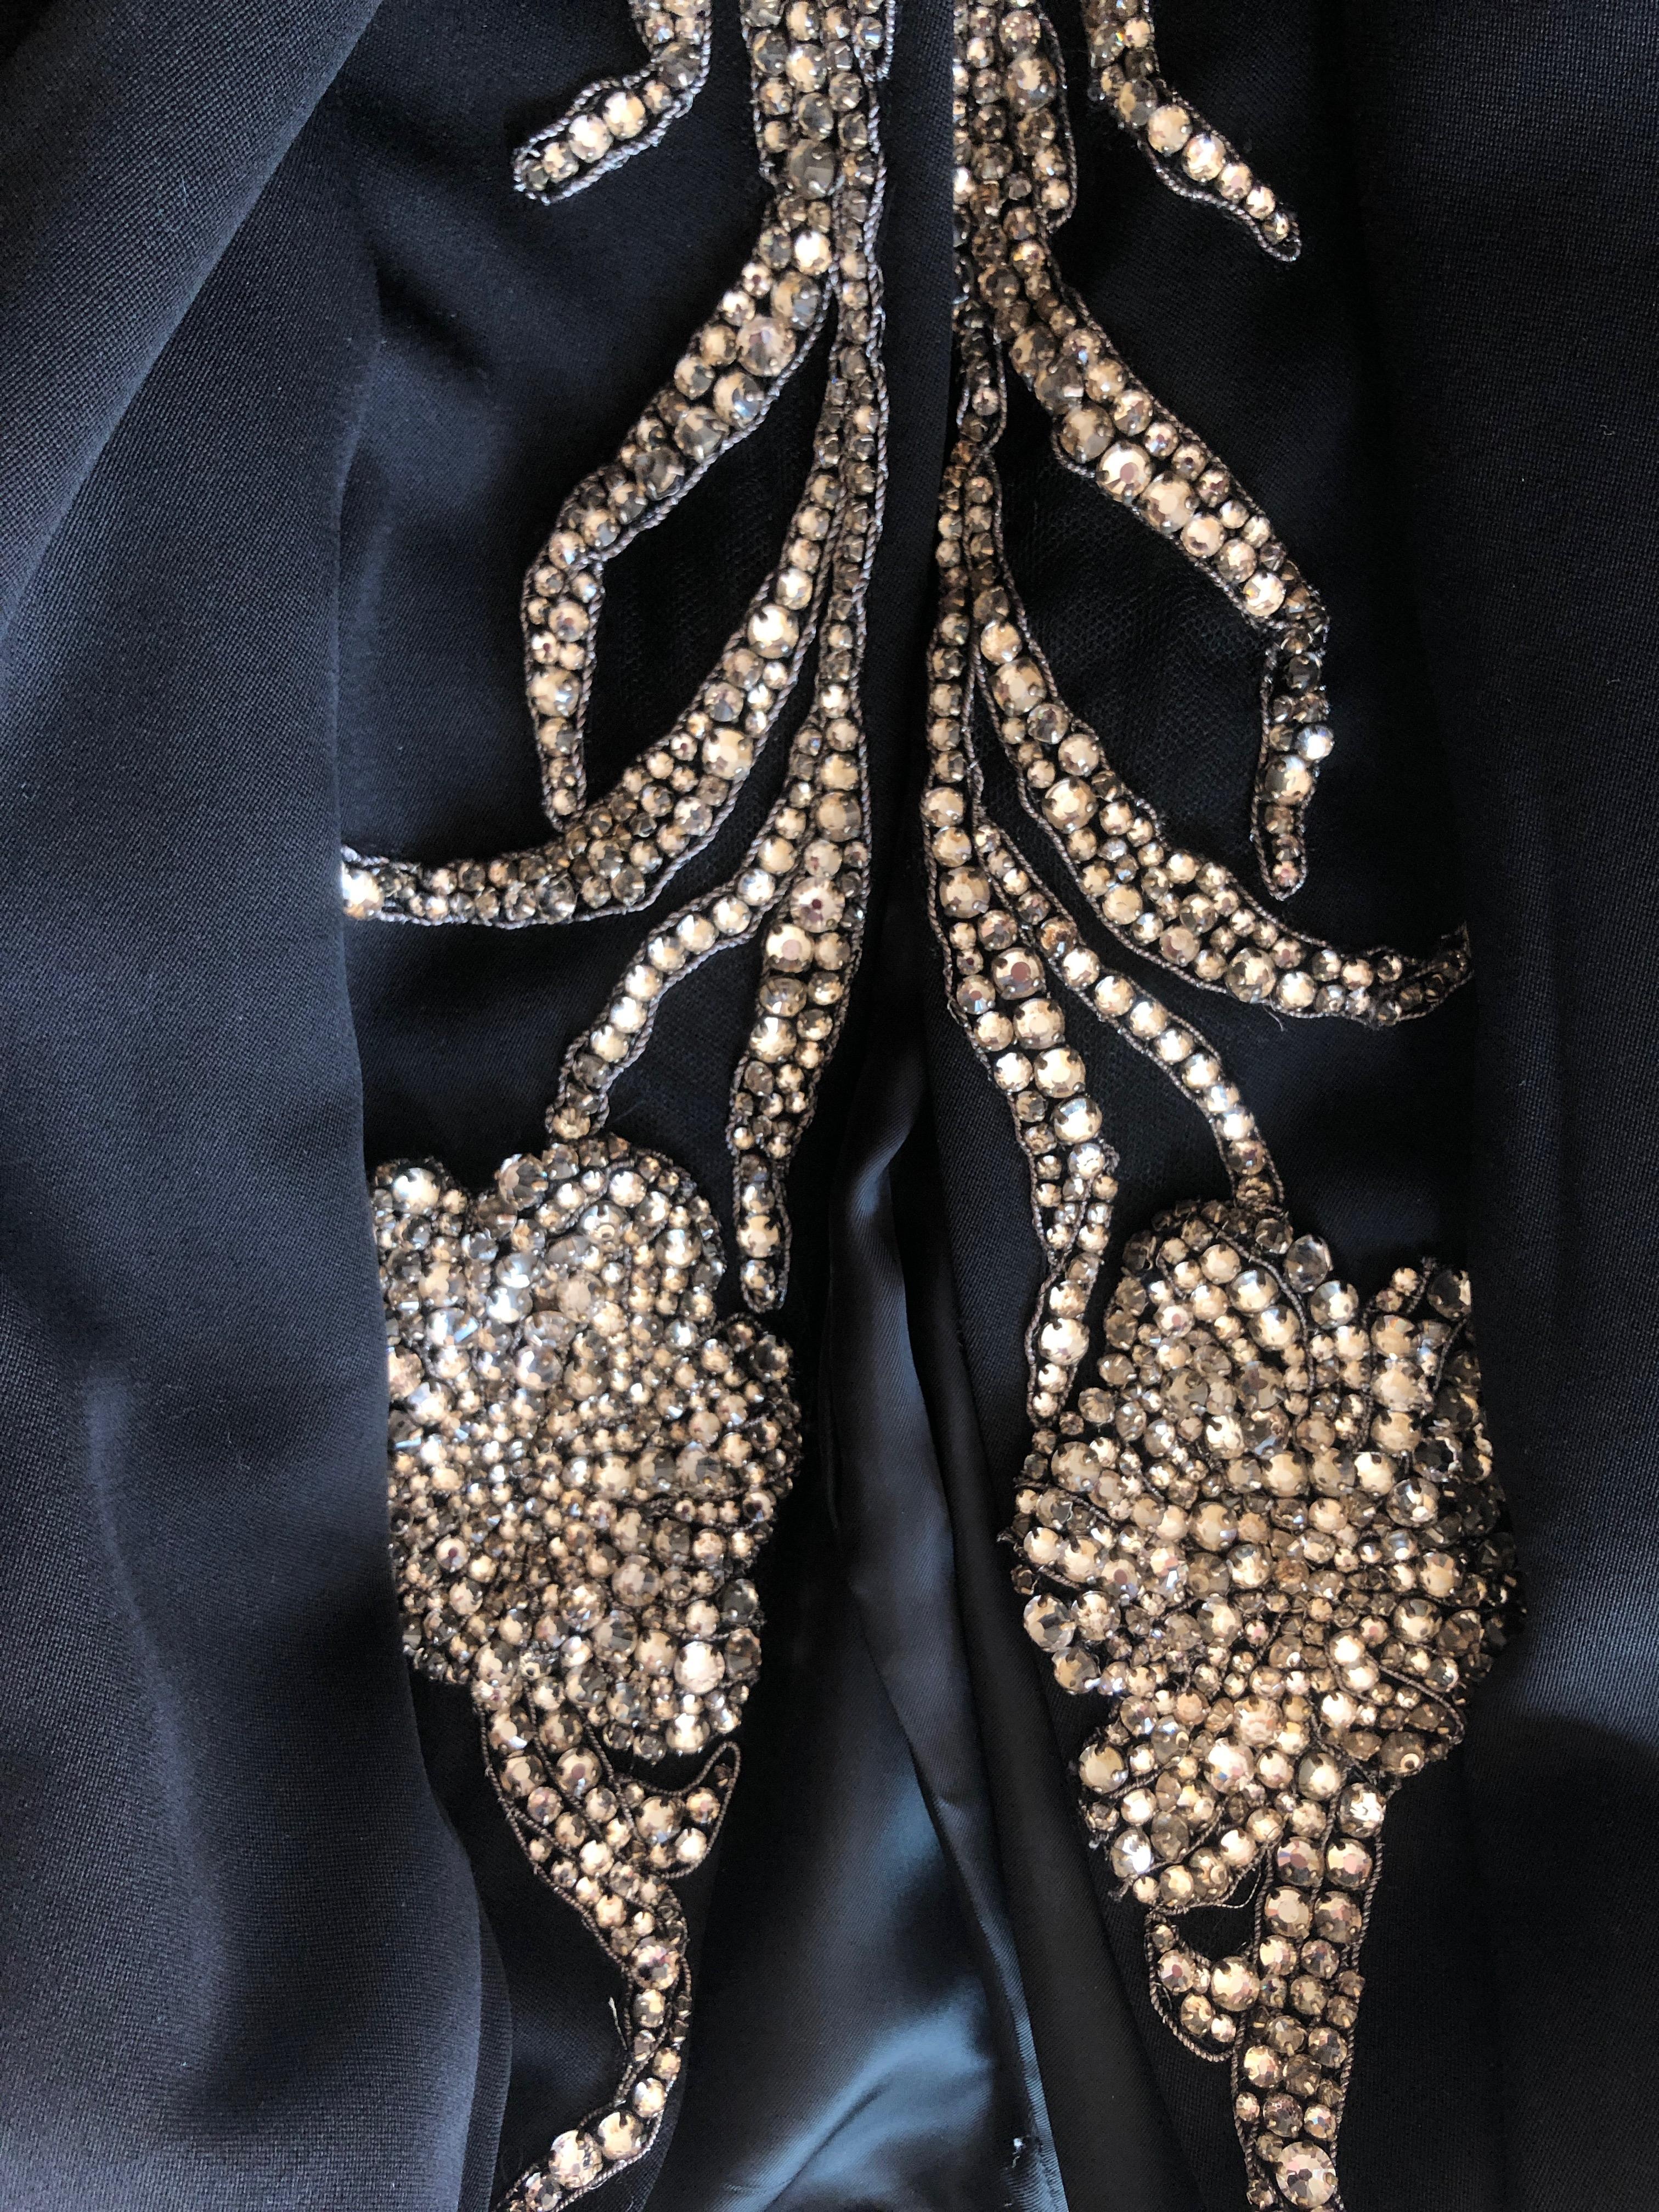 Alexander McQueen Black Tailored Tailcoat with Crystal Embellished Floral Lapels For Sale 4